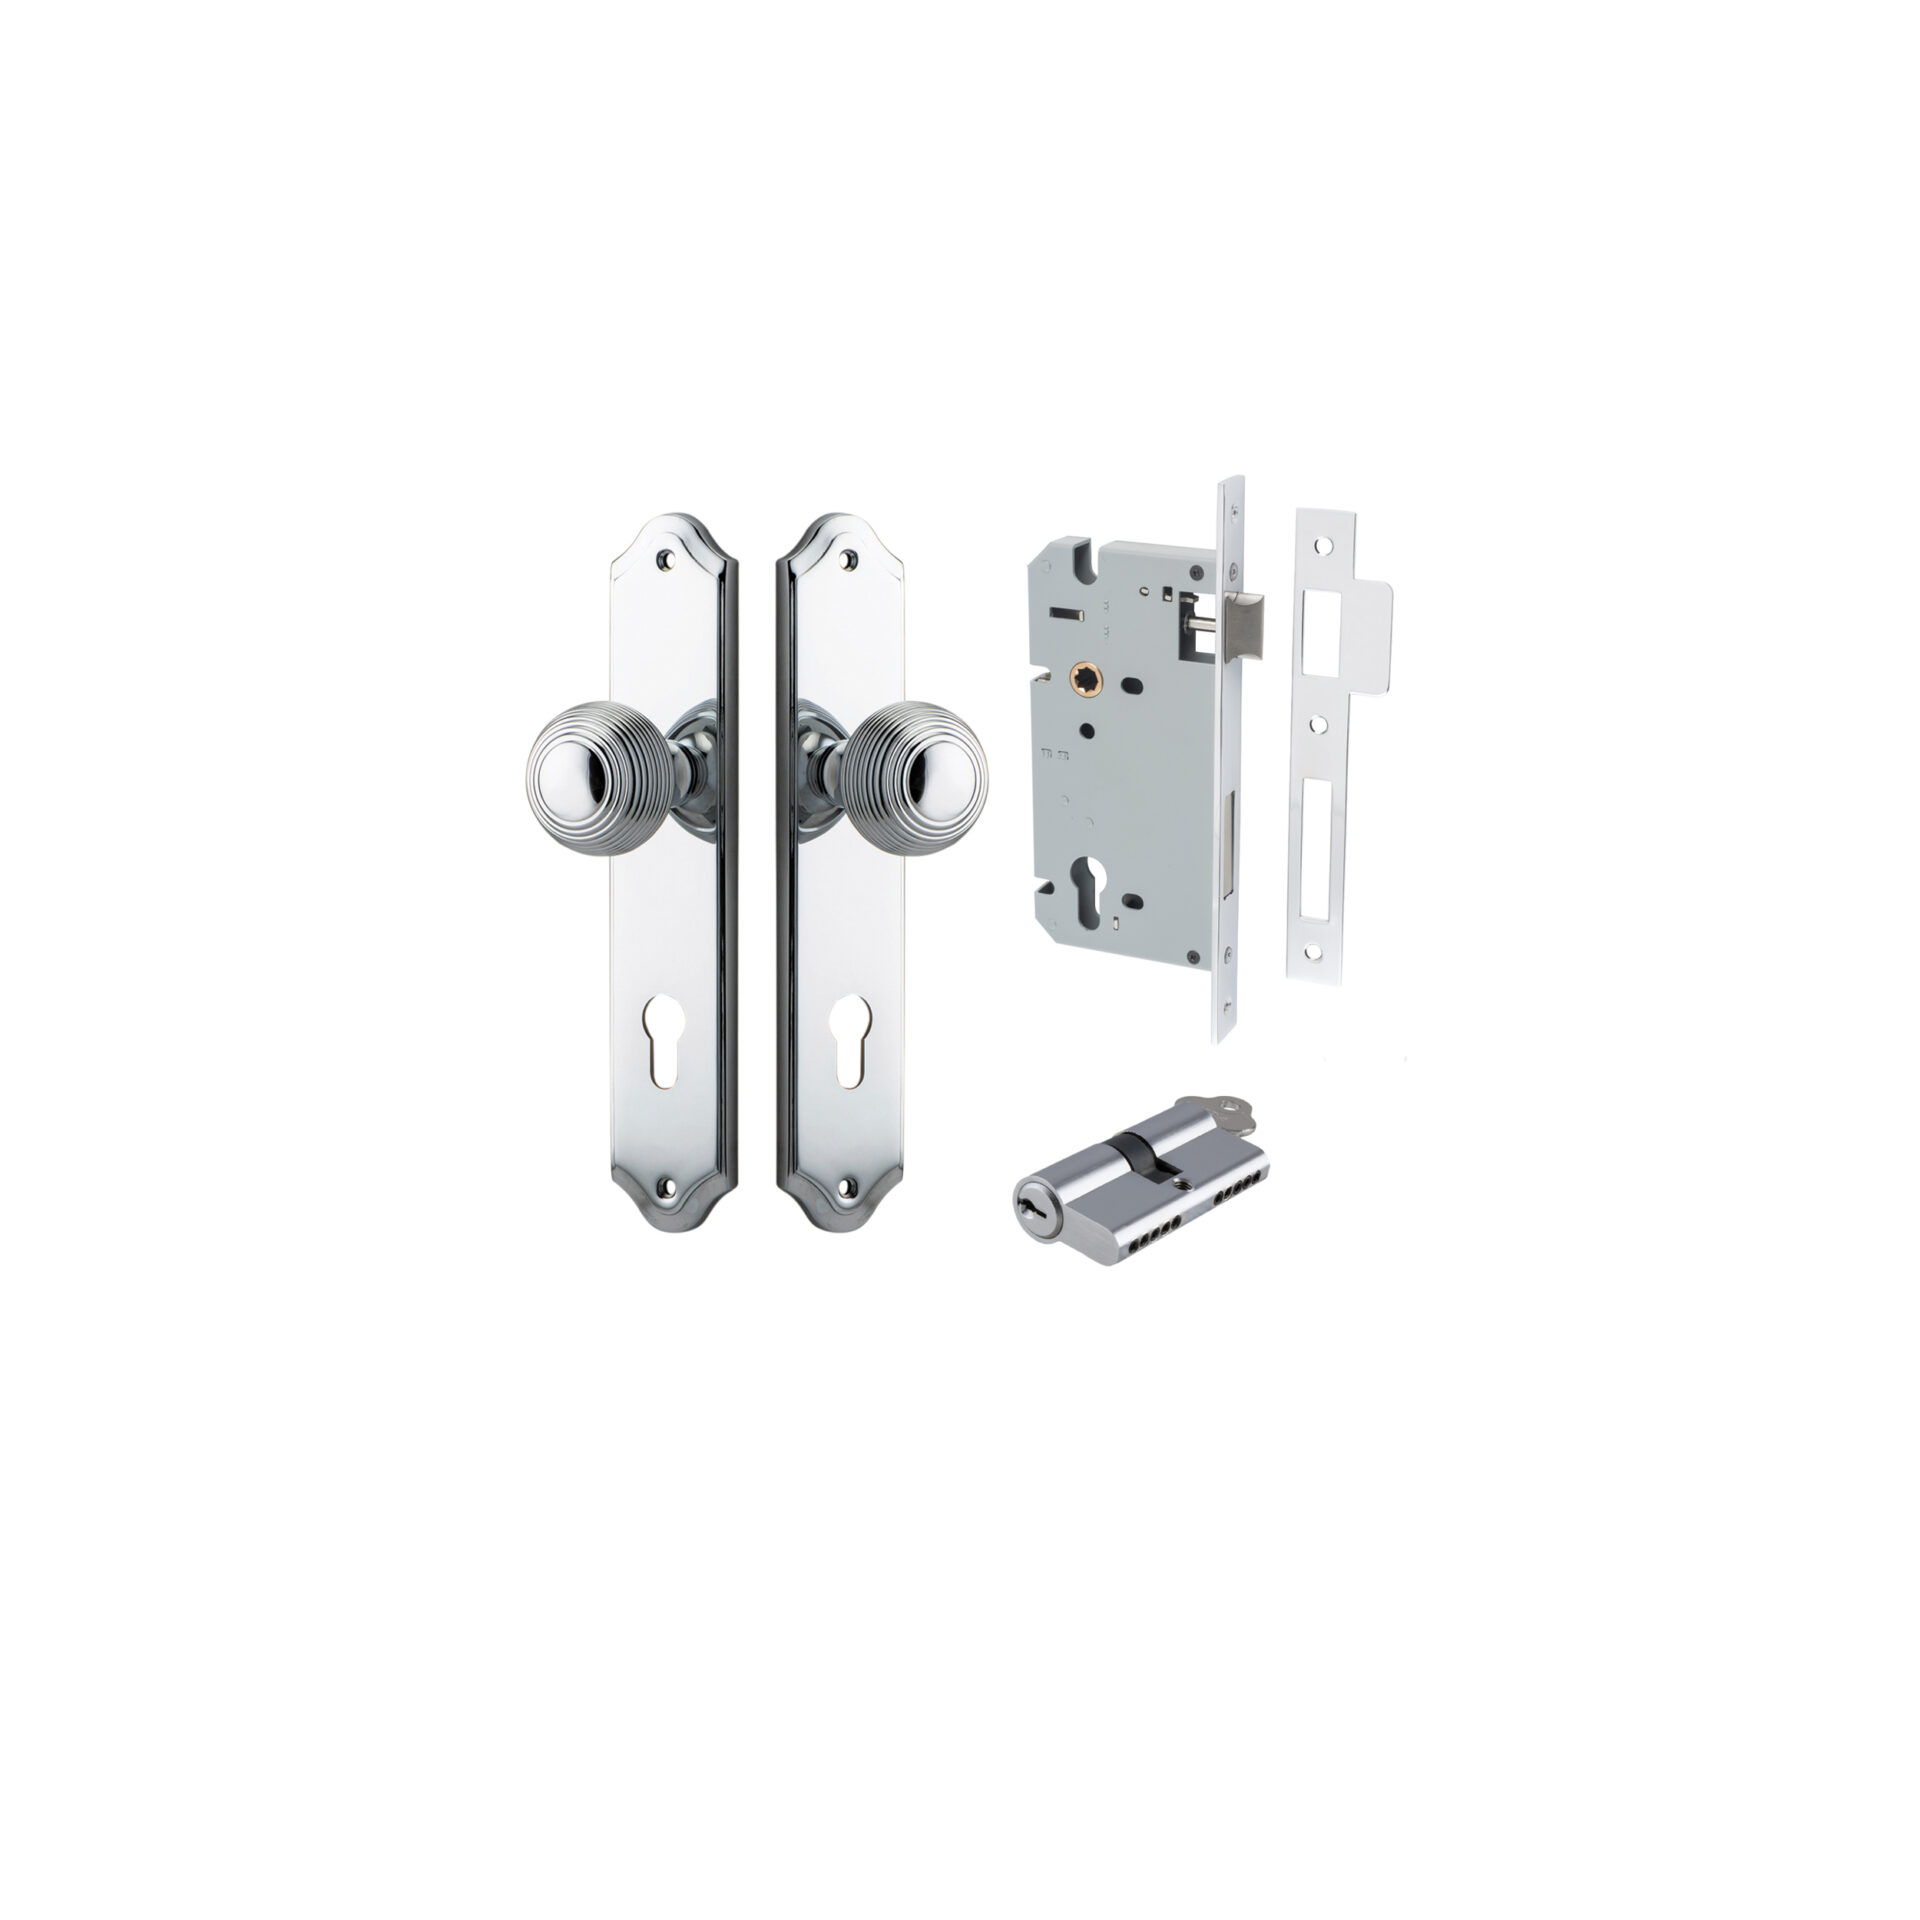 Guildford Knob - Shouldered Backplate Entrance Kit with High Security Lock